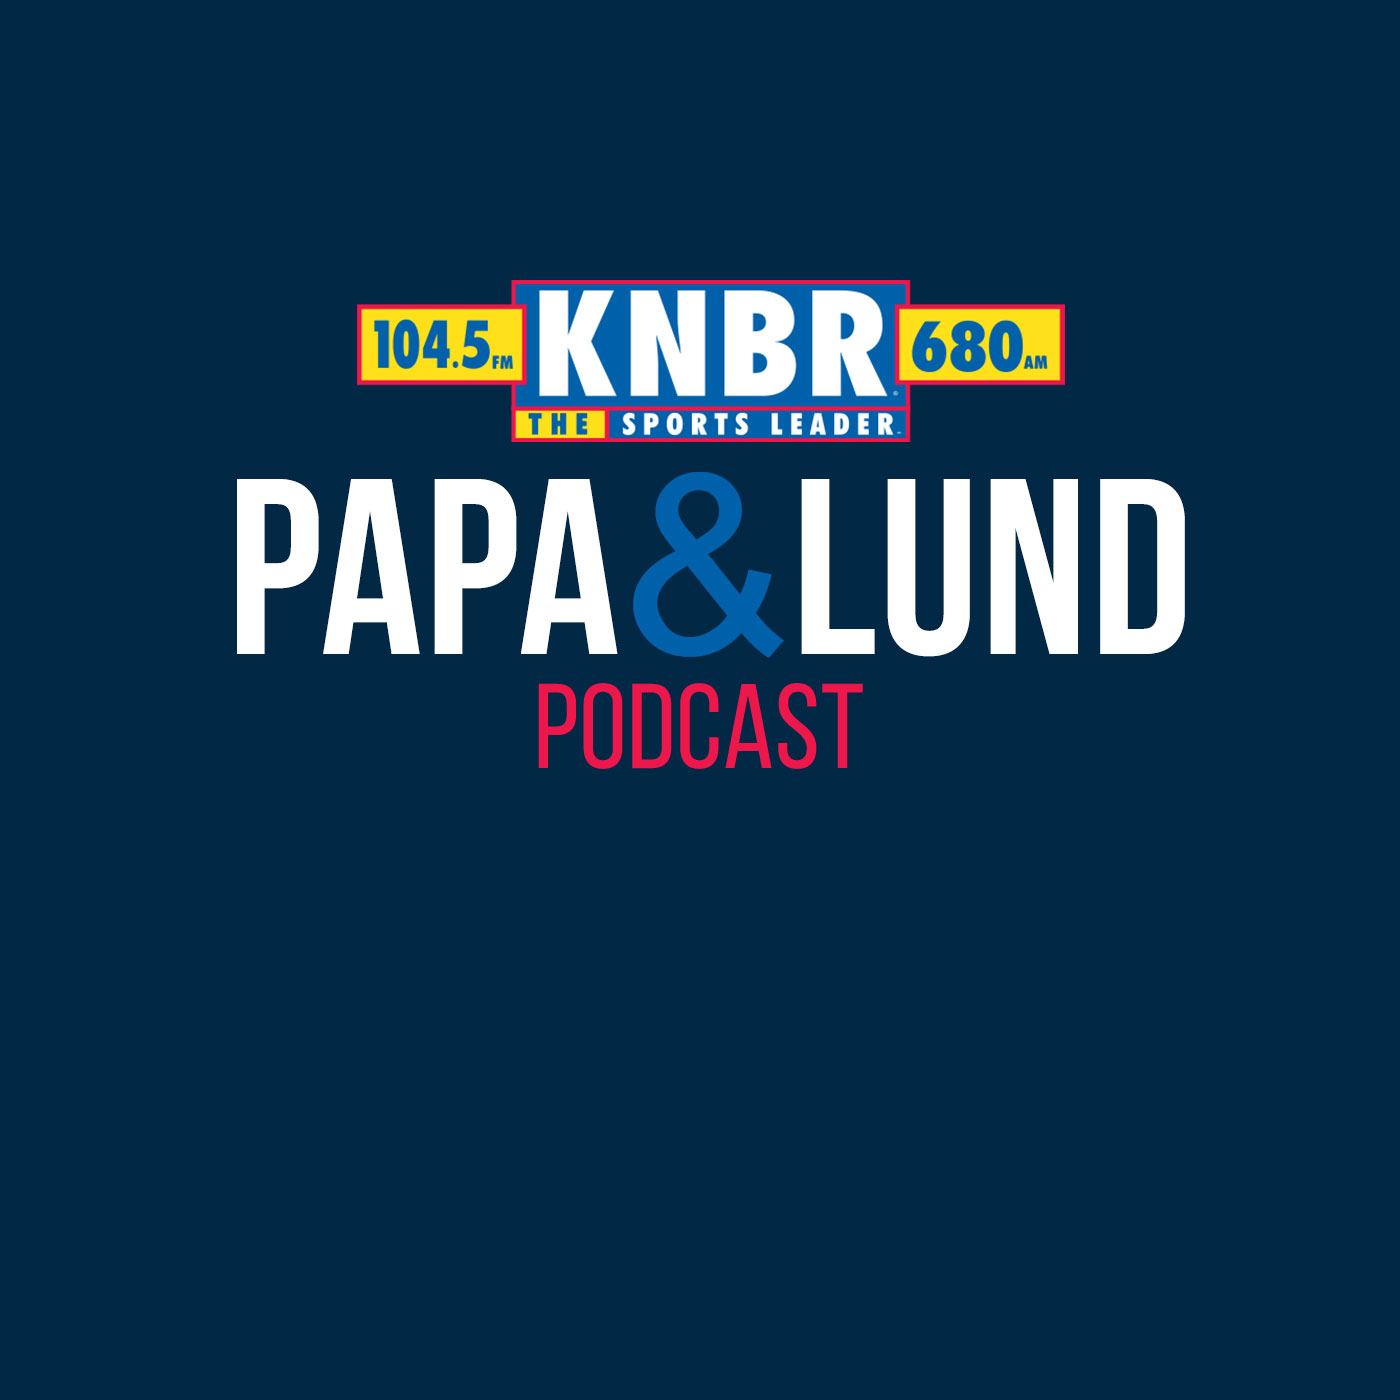 12-20 Papa & Lund are talking Dubs with Garry St. Jean and how Steph Curry continues to build on his legacy